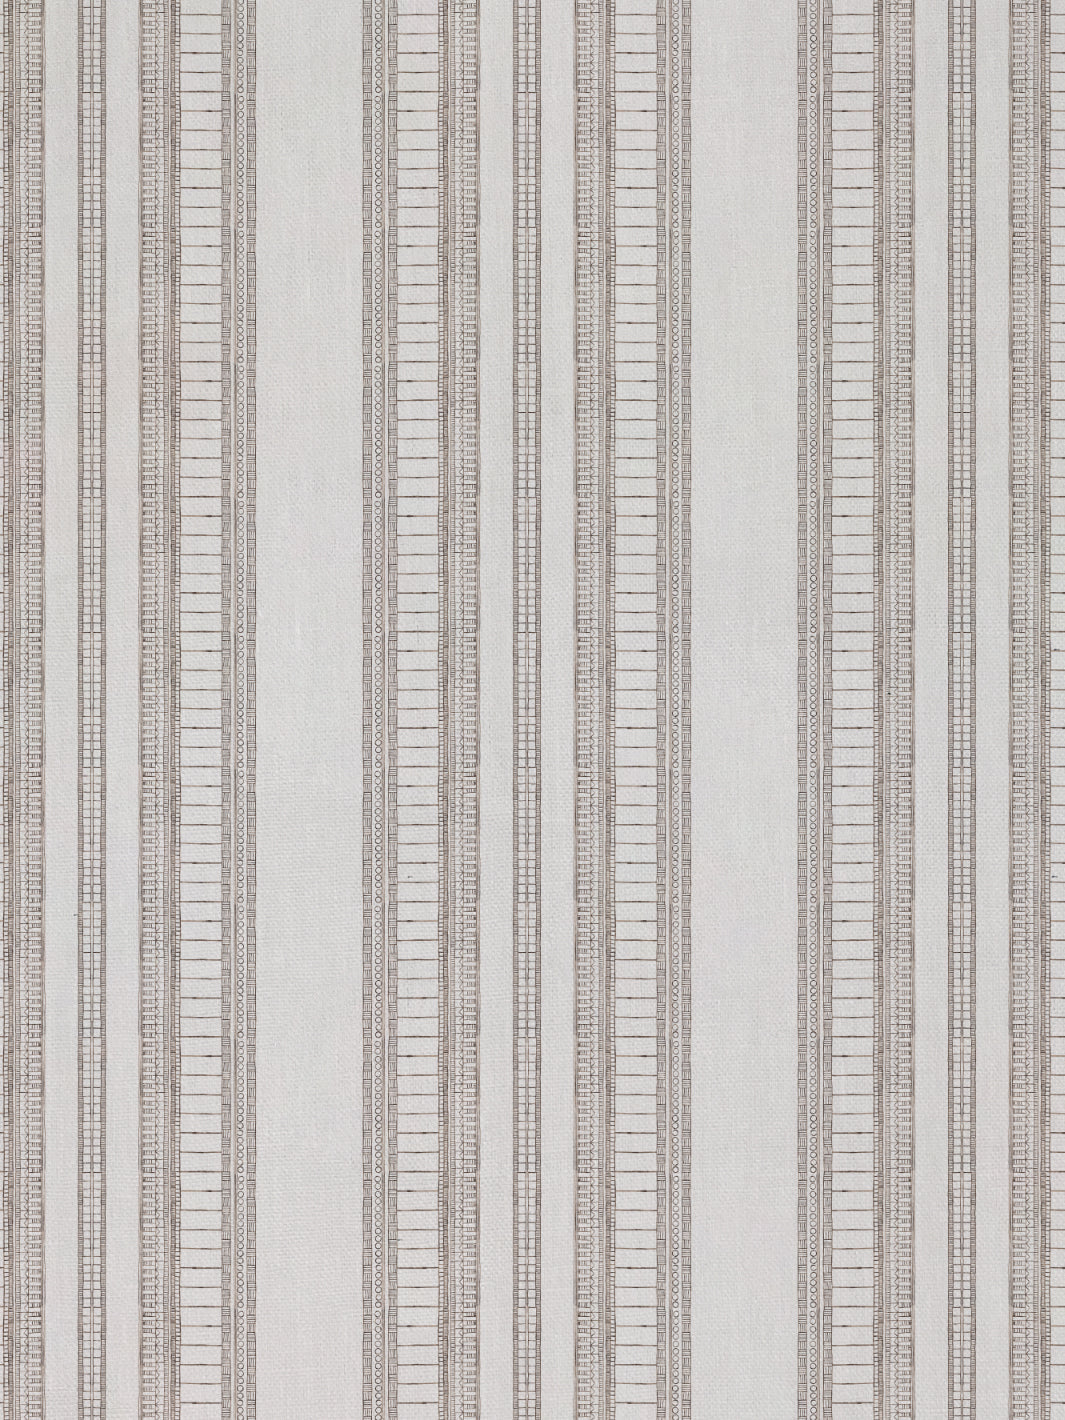 'Doodle Stripe' Linen Fabric by Nathan Turner - Brown